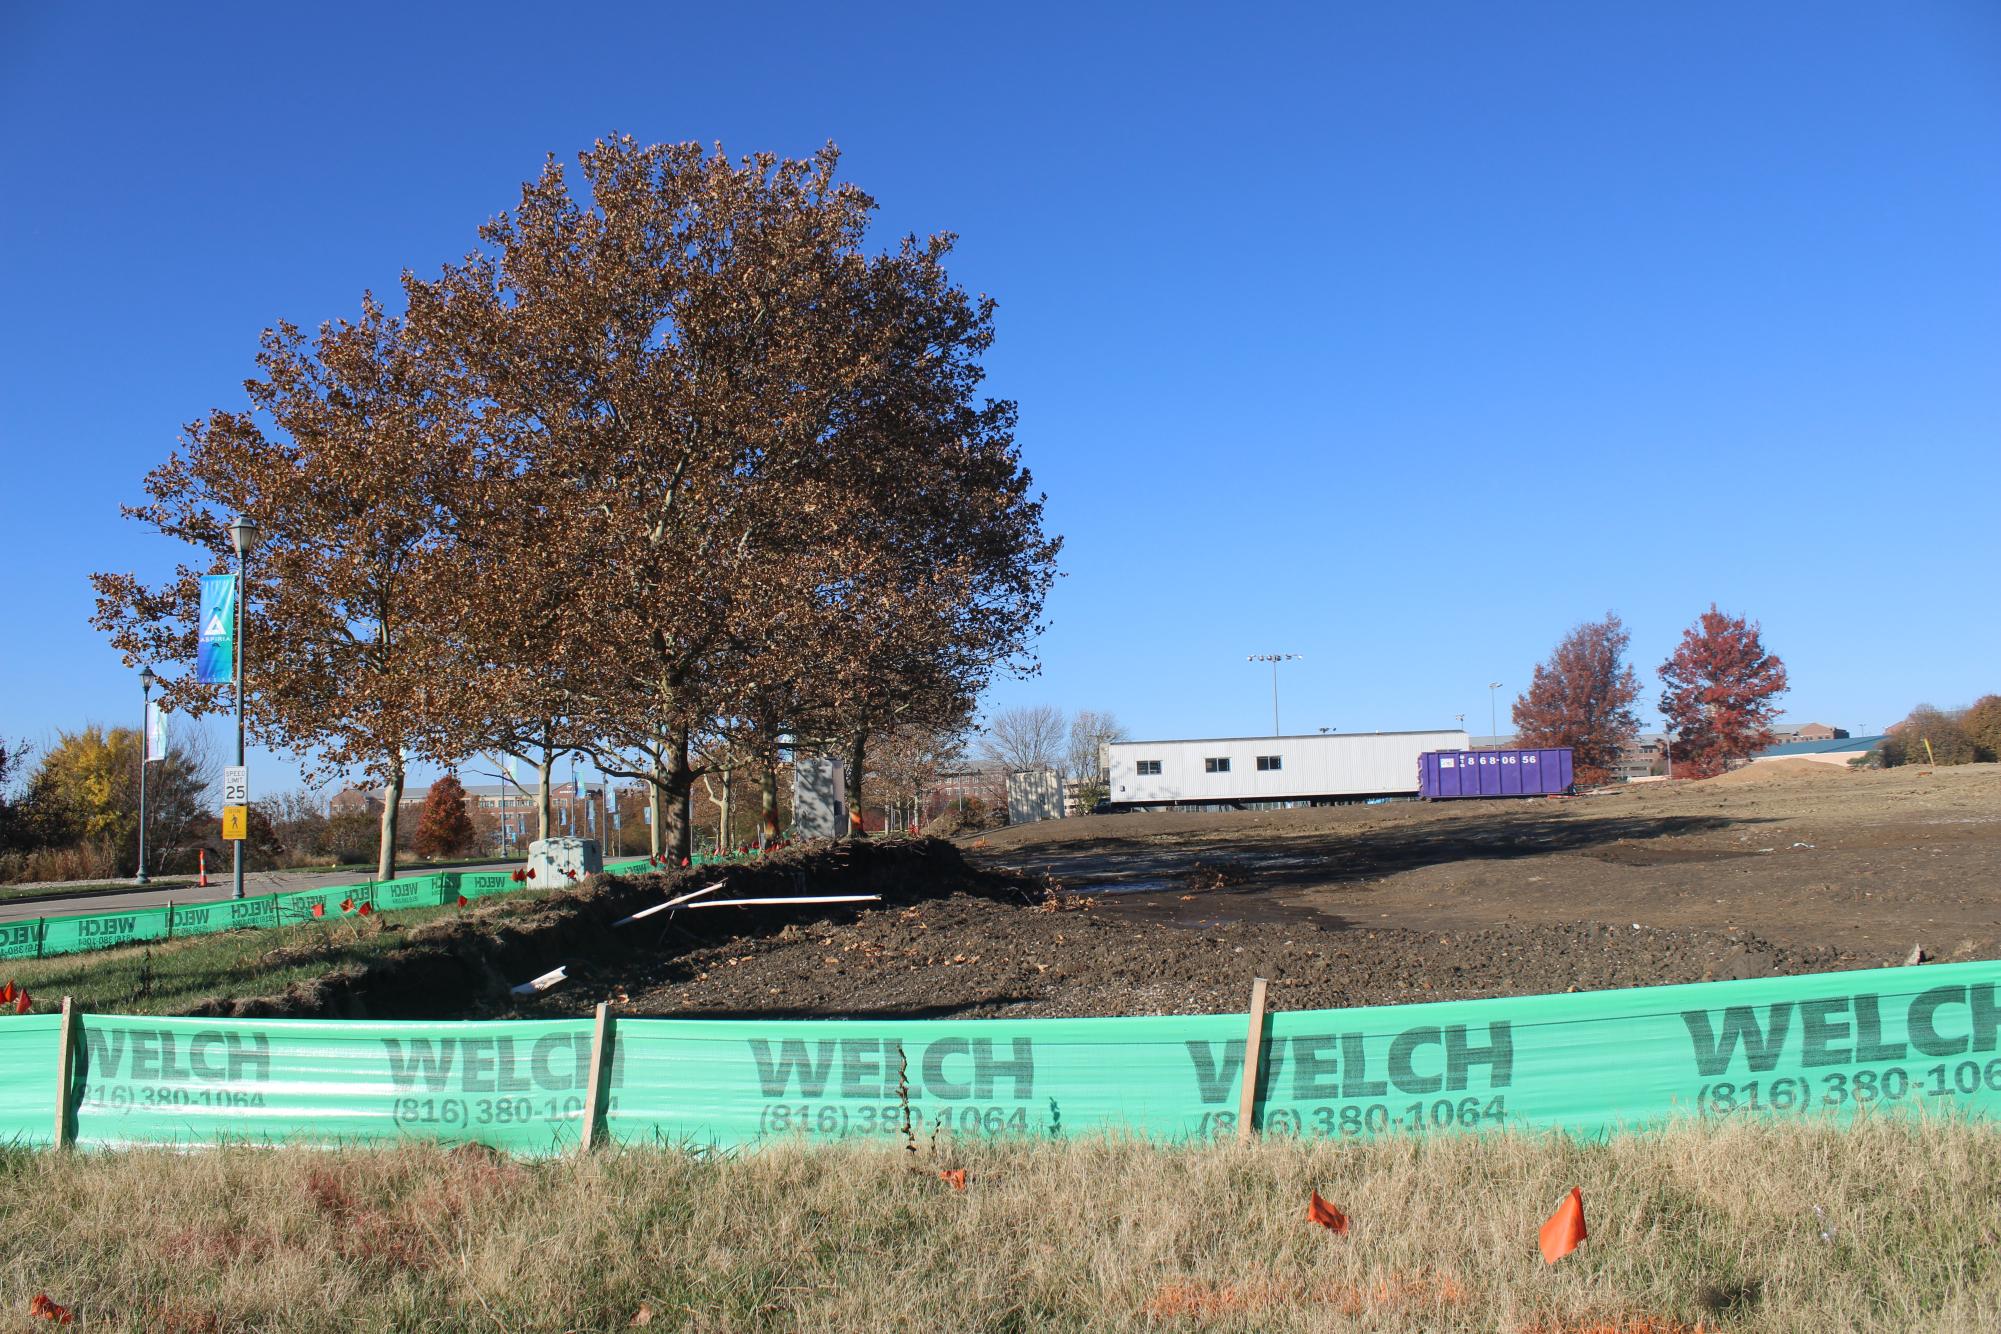 The barrier of the construction site, with the shed in the background. Image by Skyler Penner.